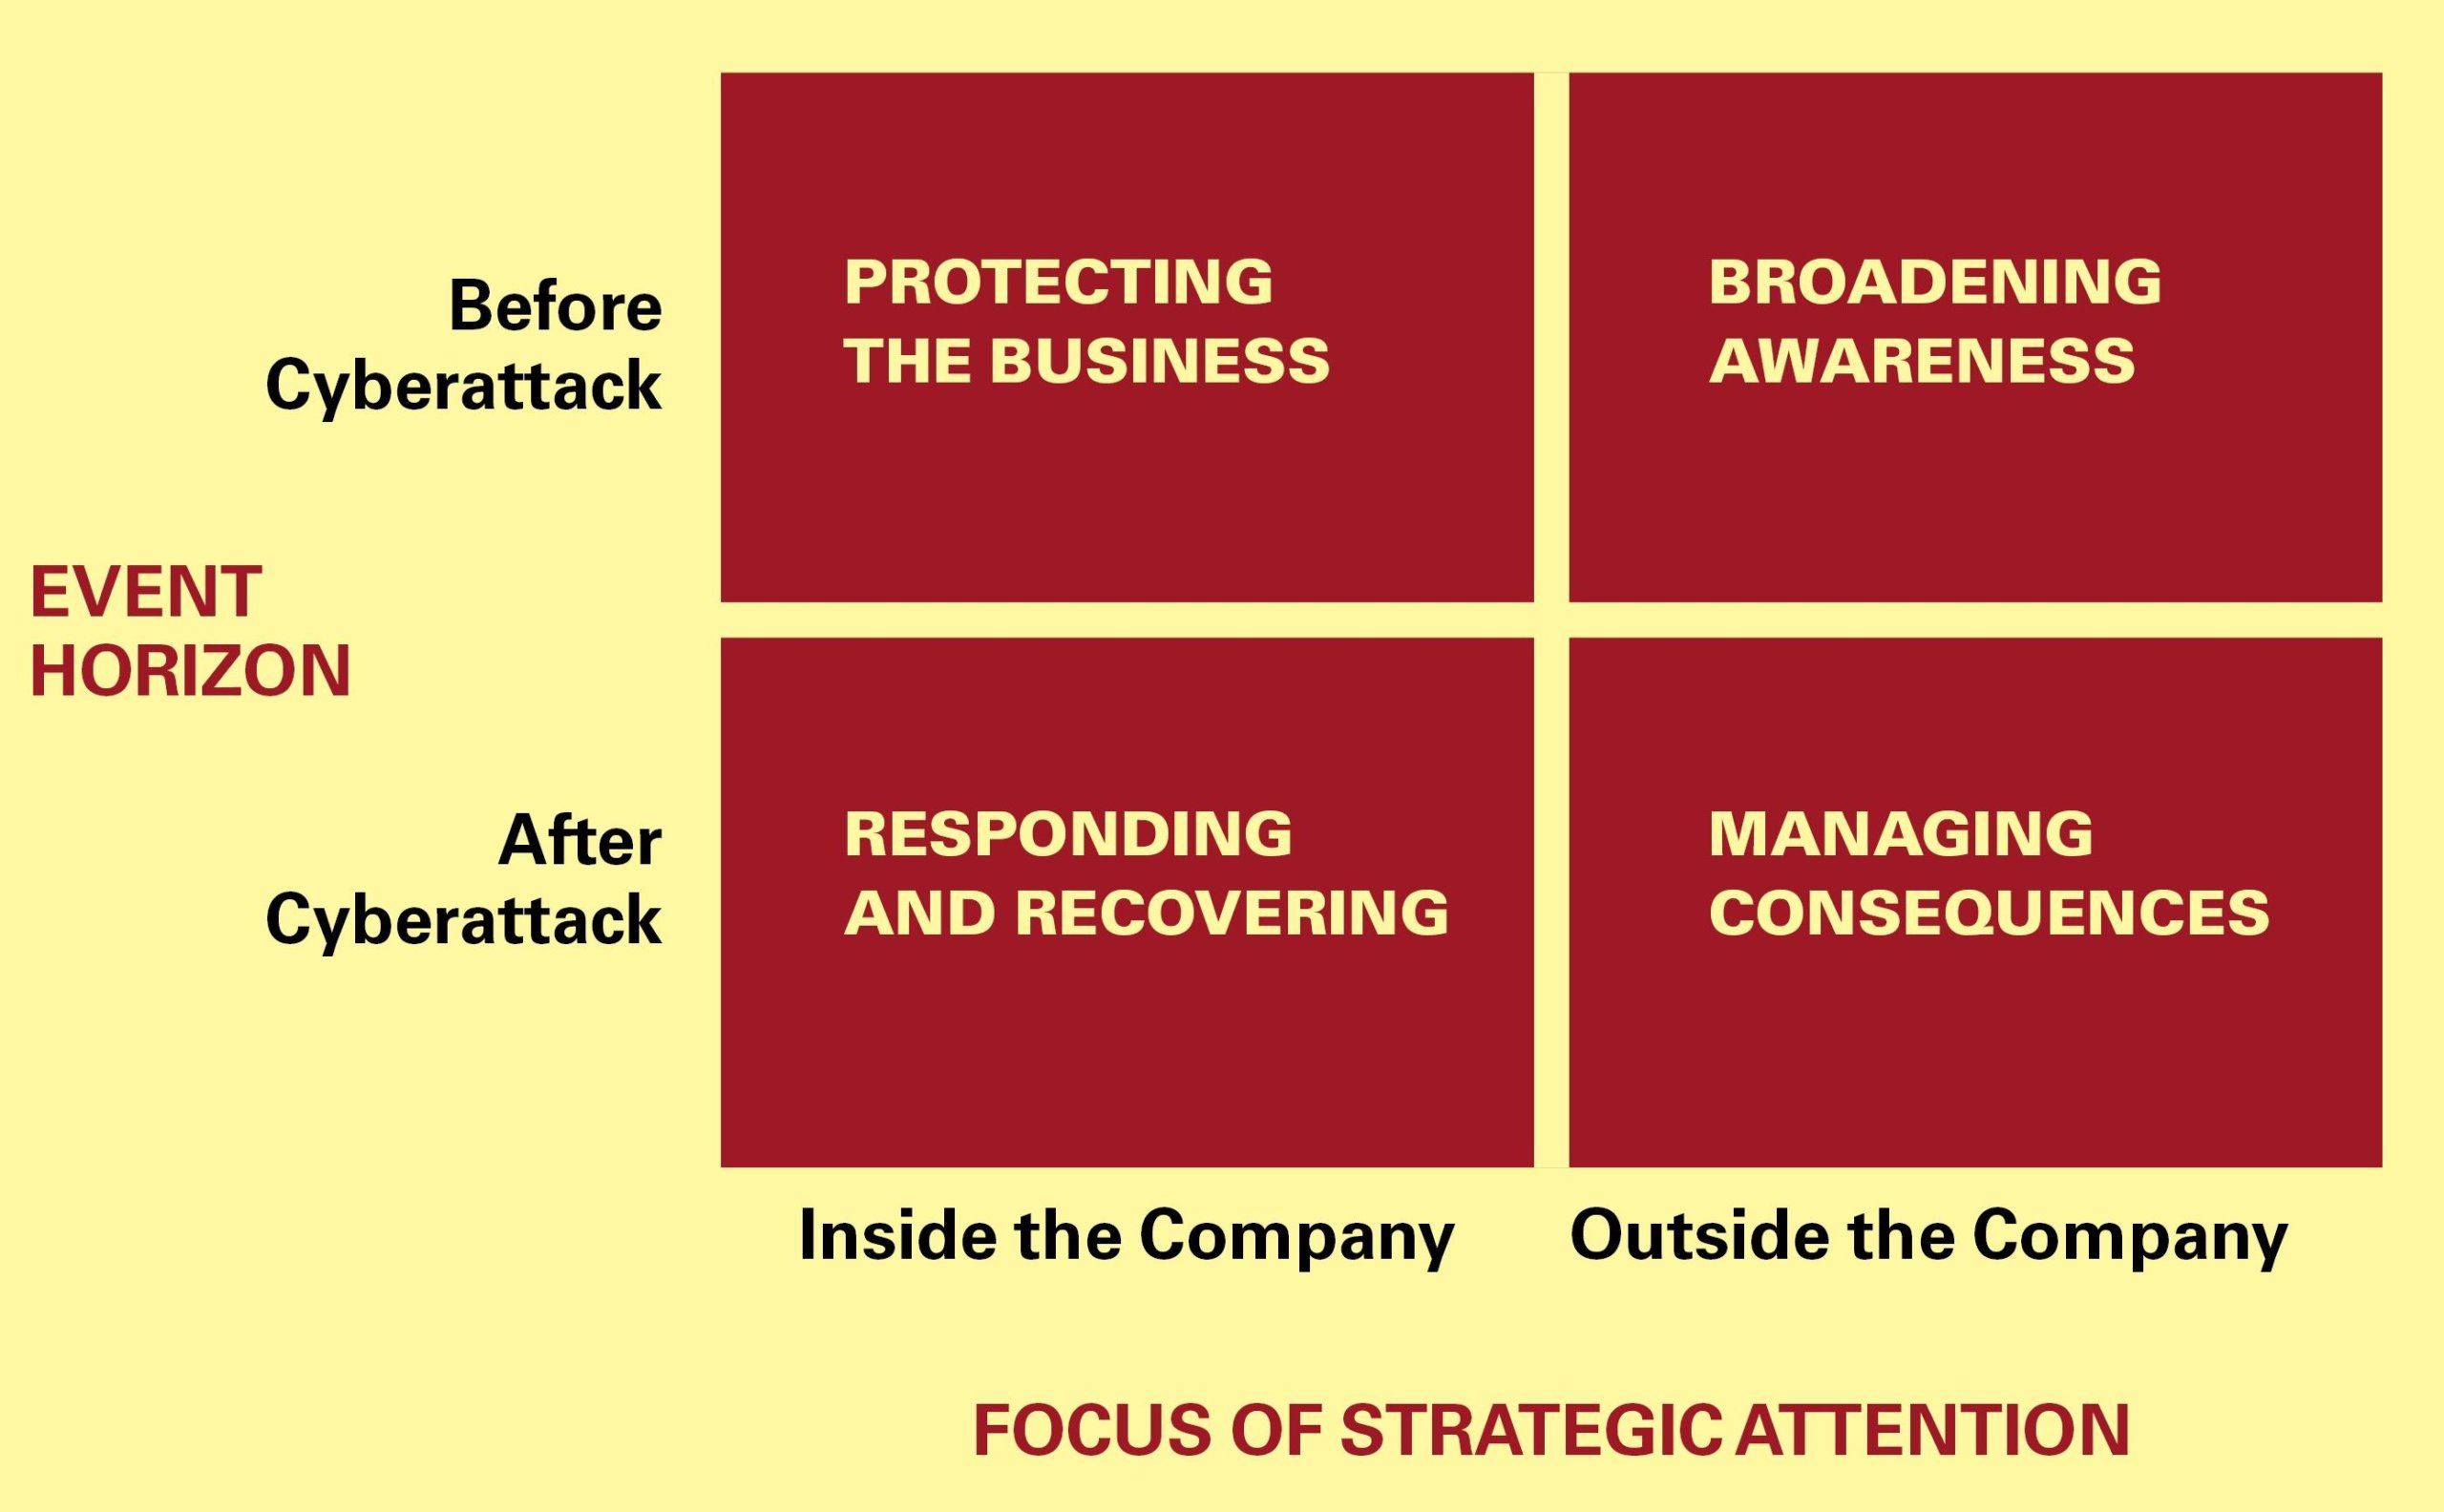 Four Elements of Organizational Resilience to Cyberattack